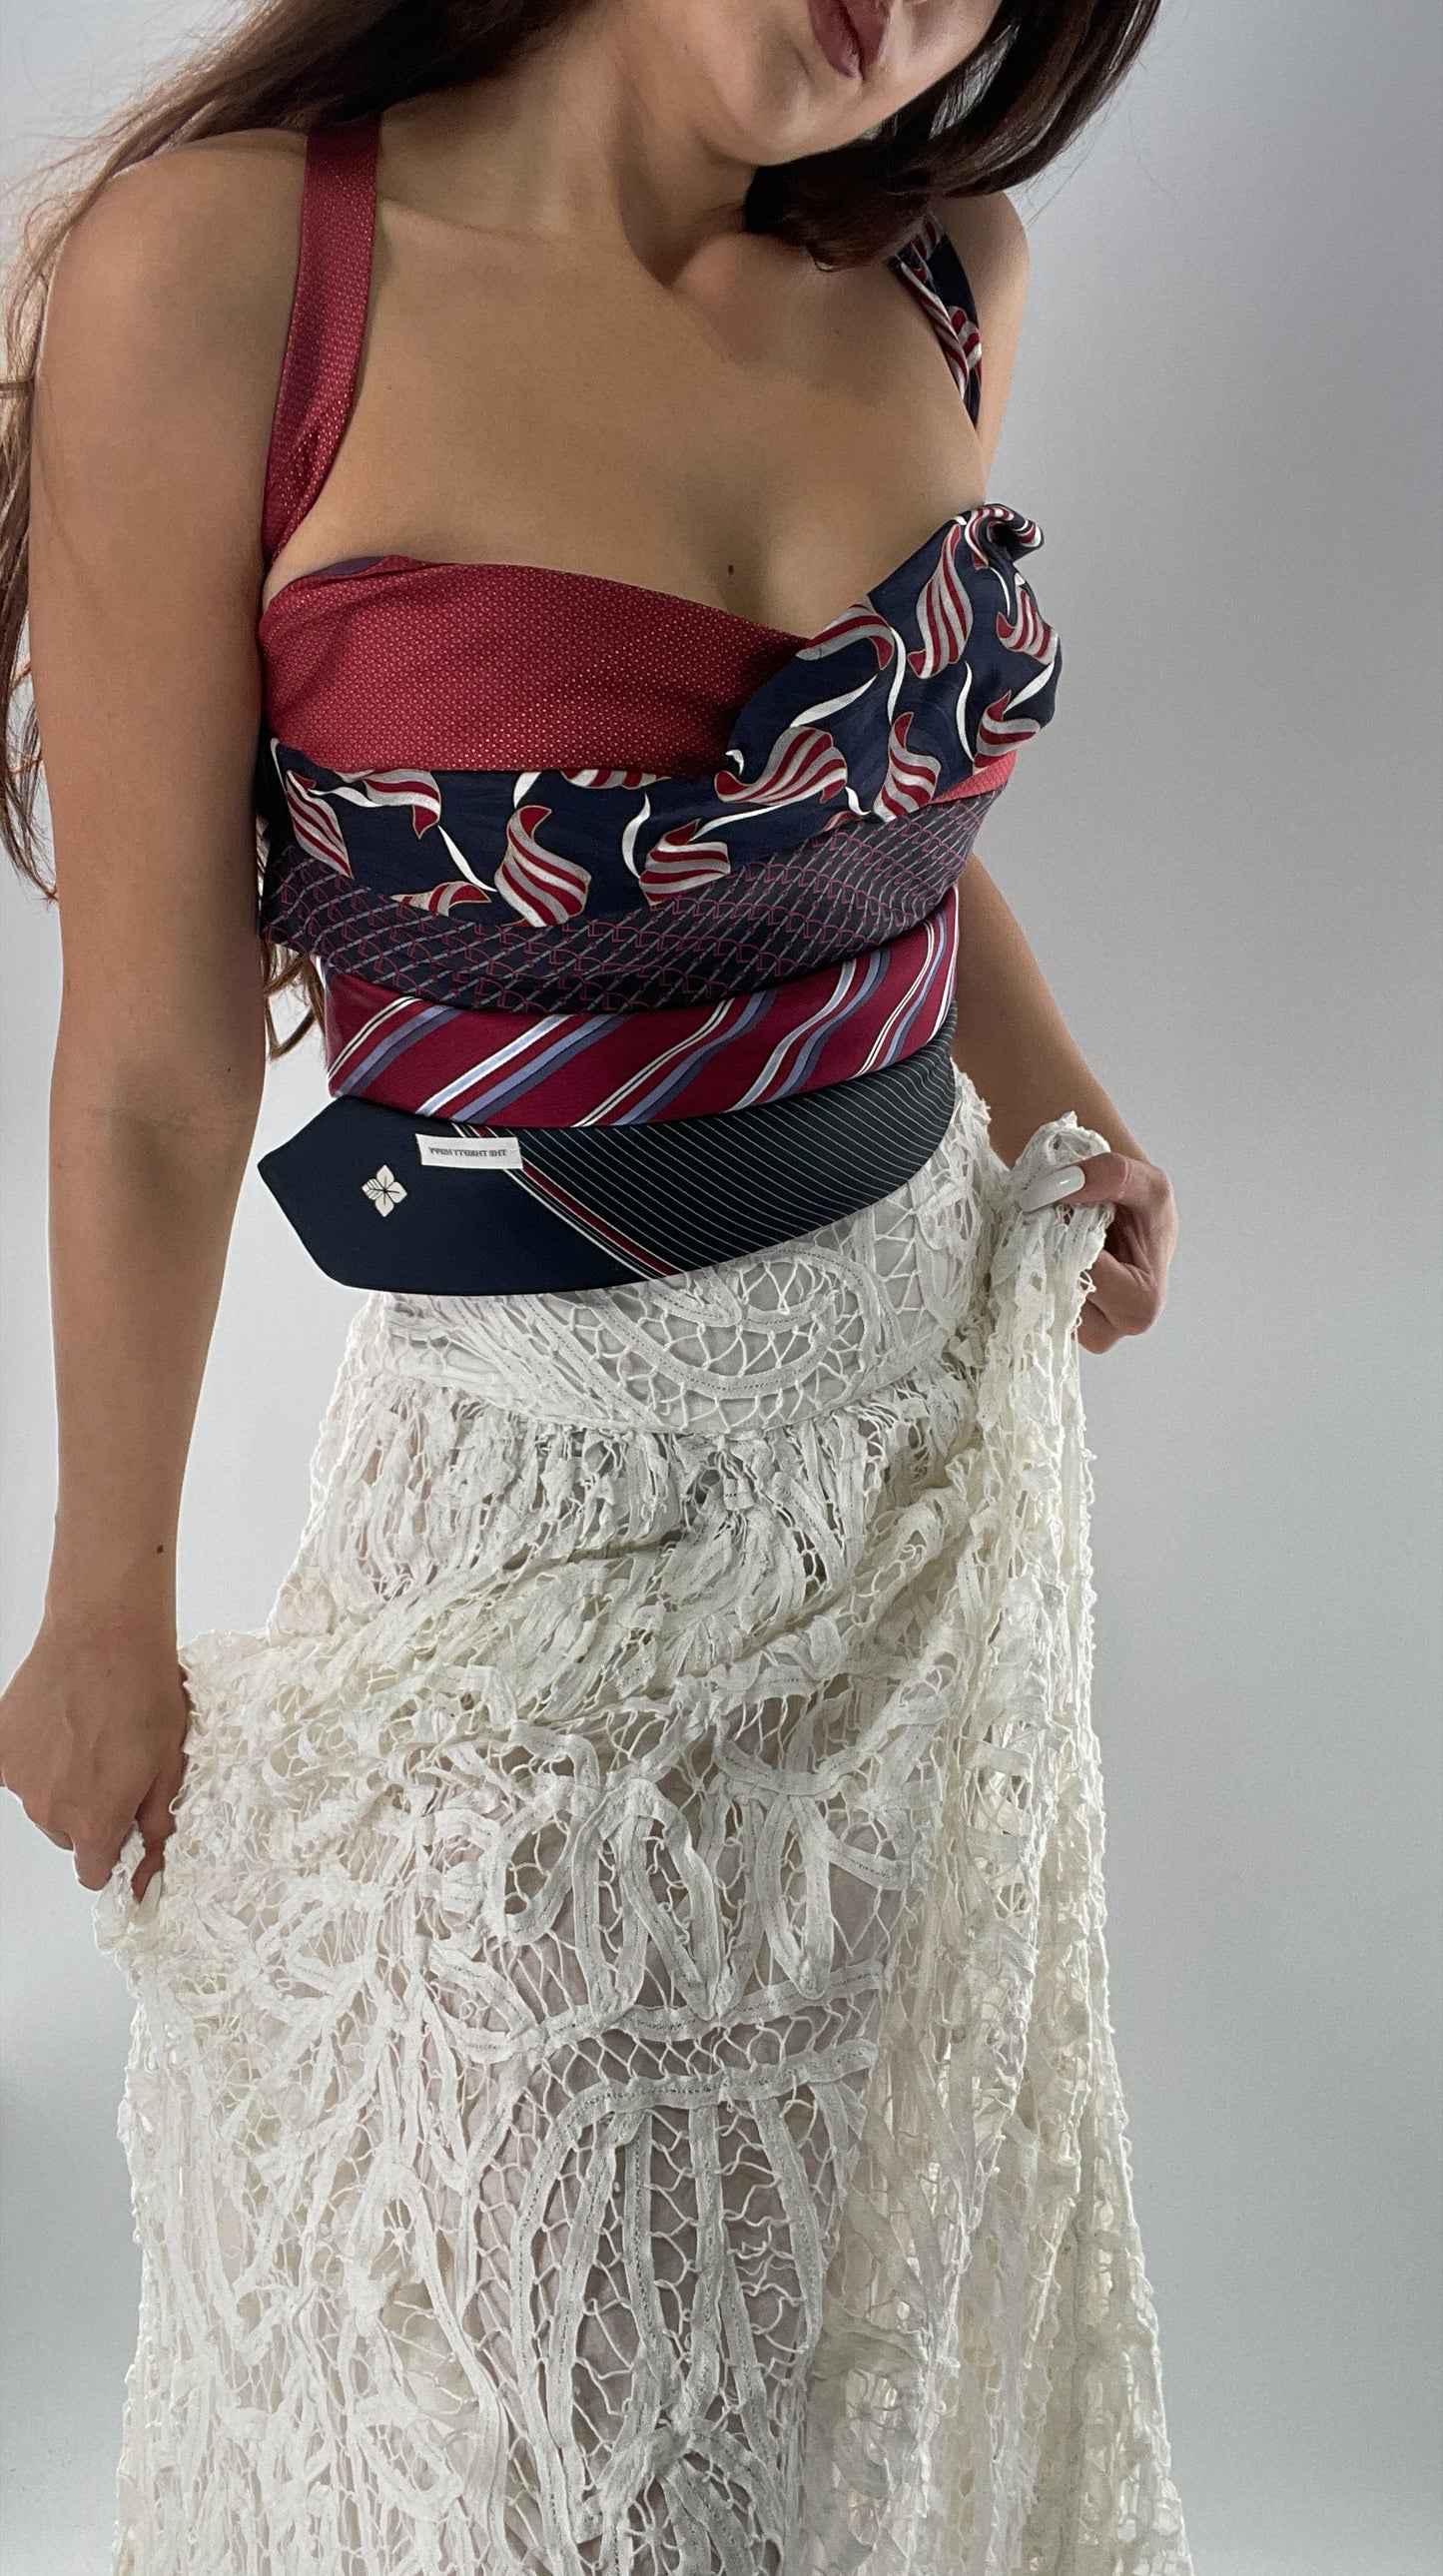 All Tied Up Fourth of July Top (One Size)